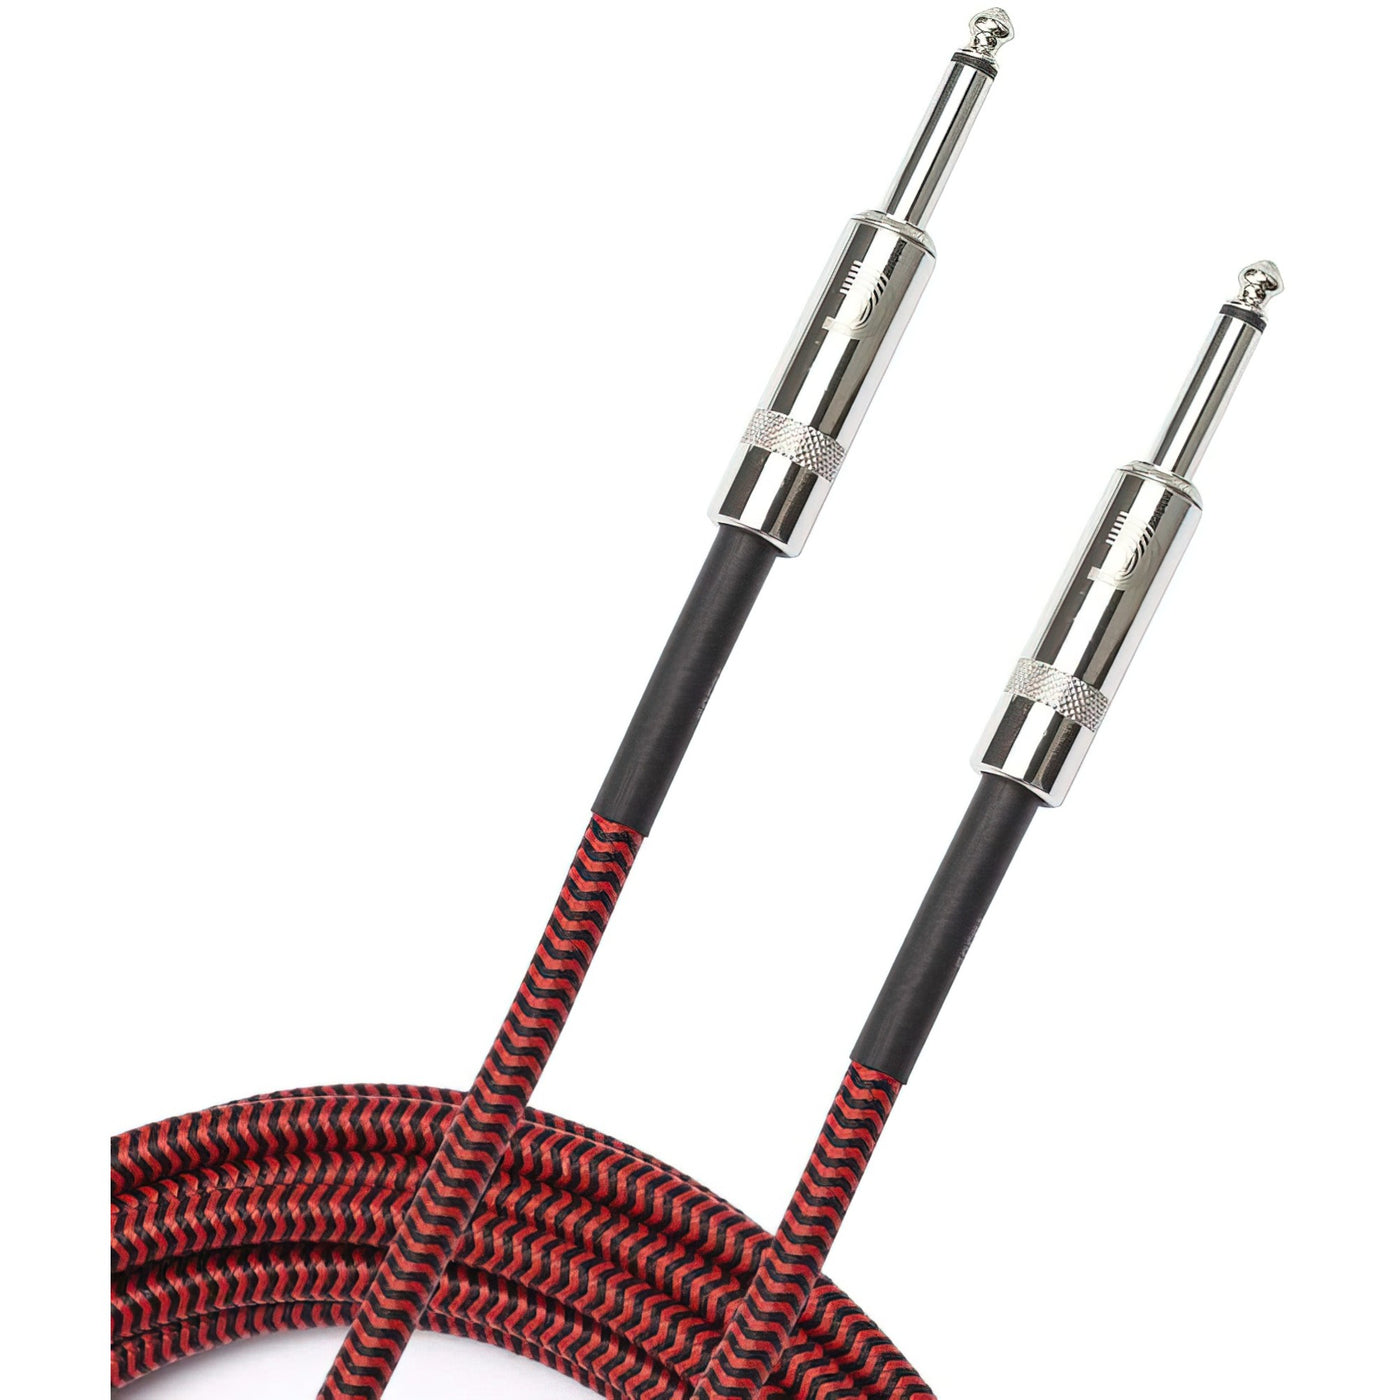 D'Addario Custom Series Braided Instrument Cable, Red, 10' (PW-BG-10RD)